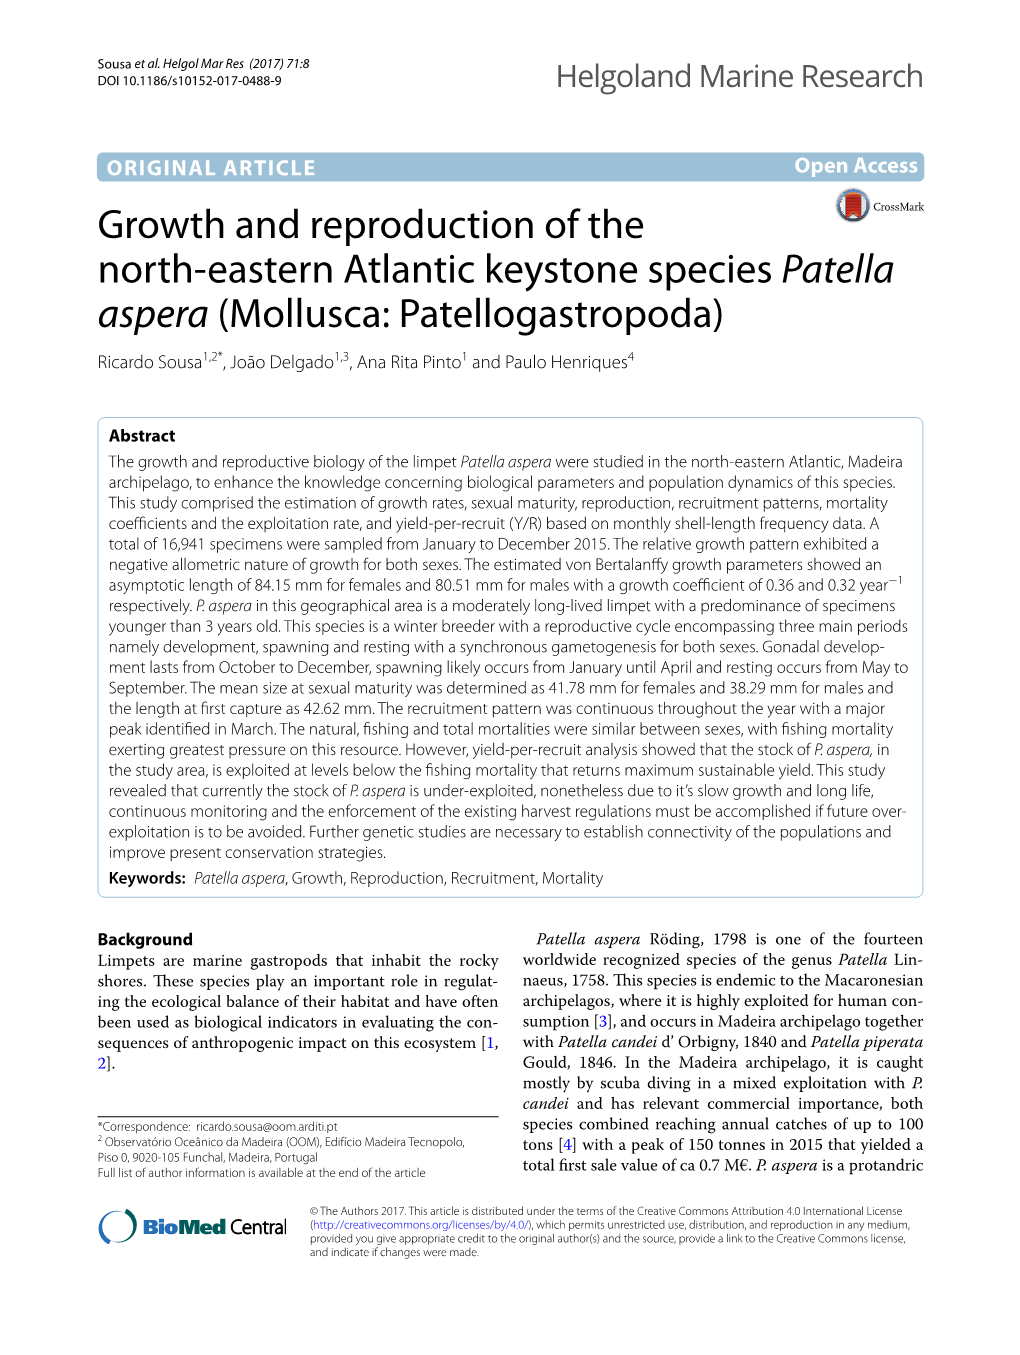 Growth and Reproduction of the North